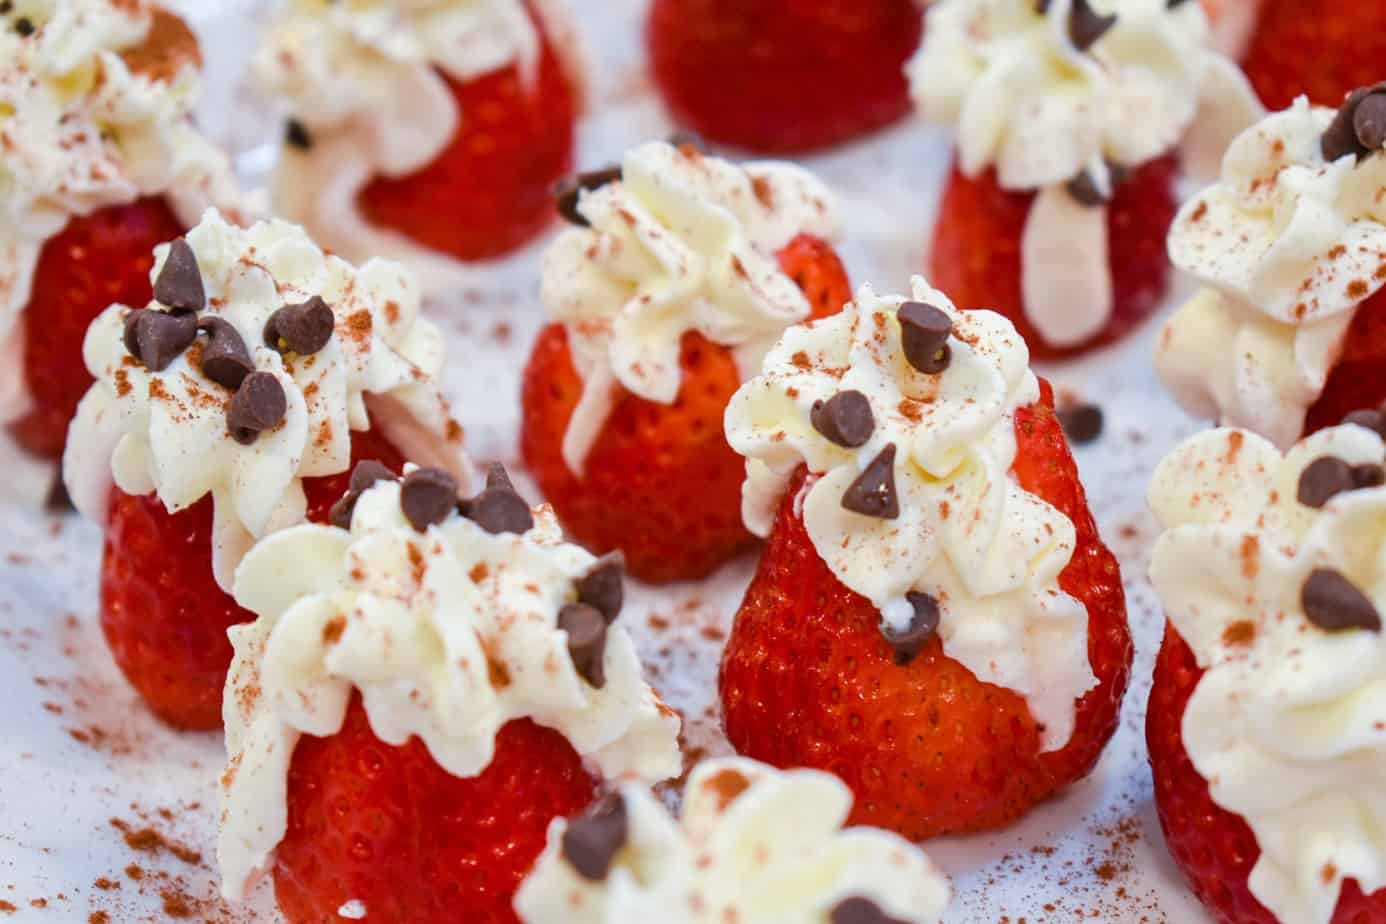 Lots of cannoli cream filled strawberries with mini chocolate chips.